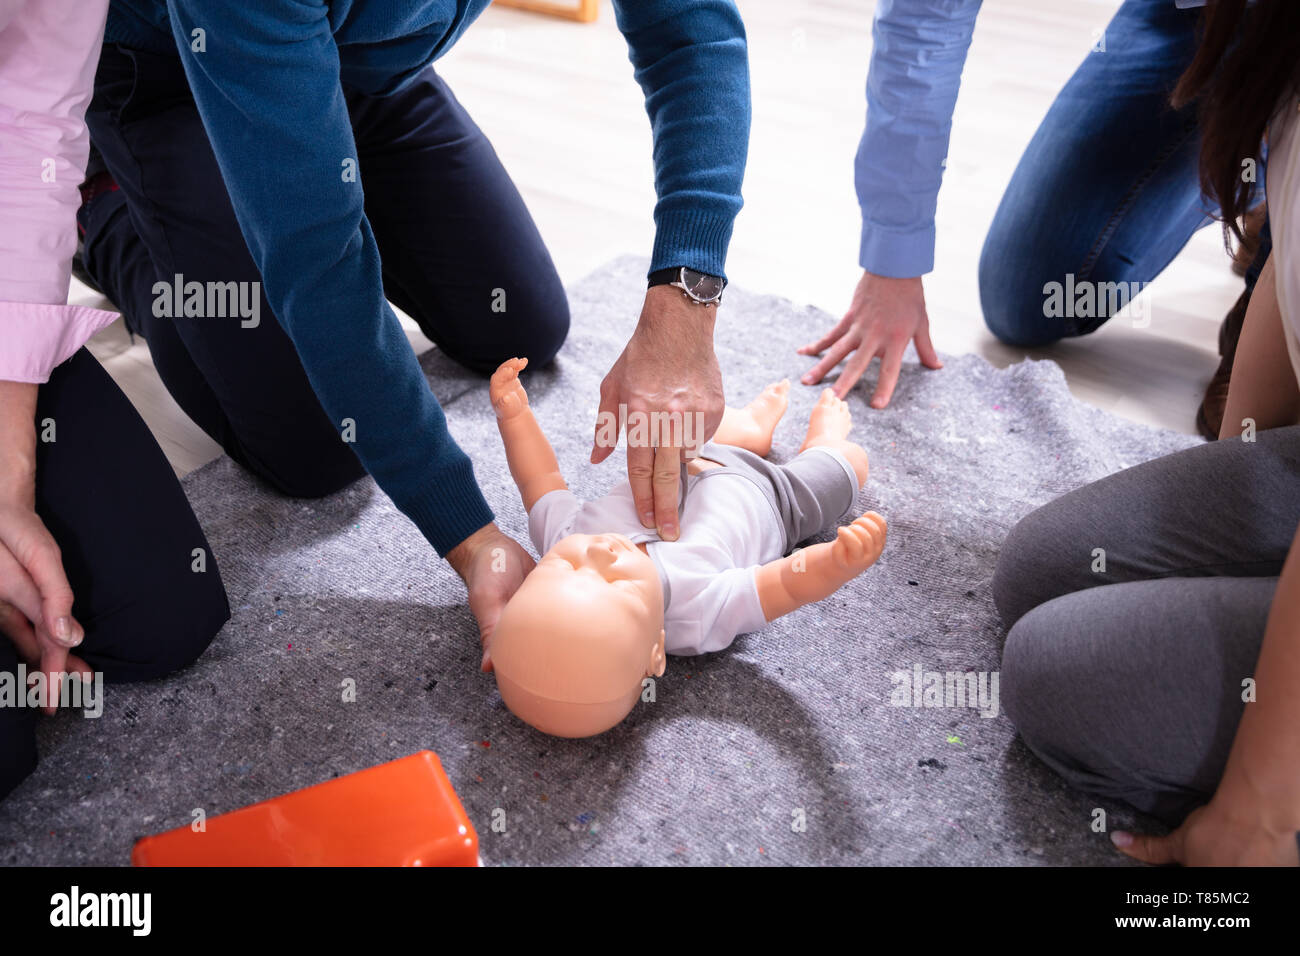 Specialist Giving Baby CPR Dummy First Aid Training To His Colleagues Stock Photo